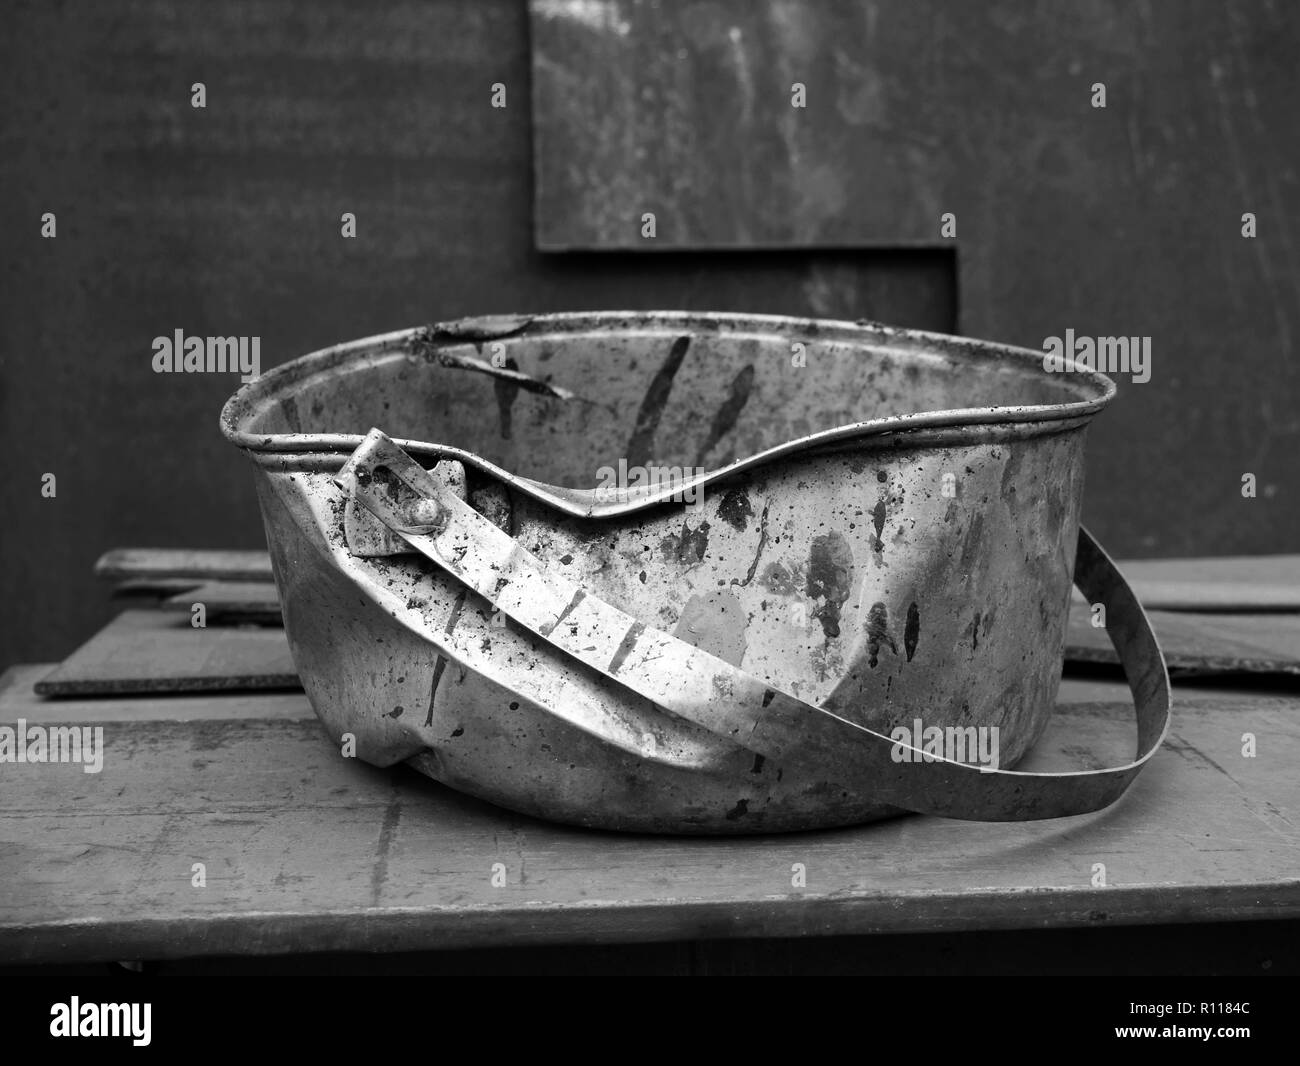 Dented metal bucket discarded, used for paints and liquids in a working boatyard. Stock Photo